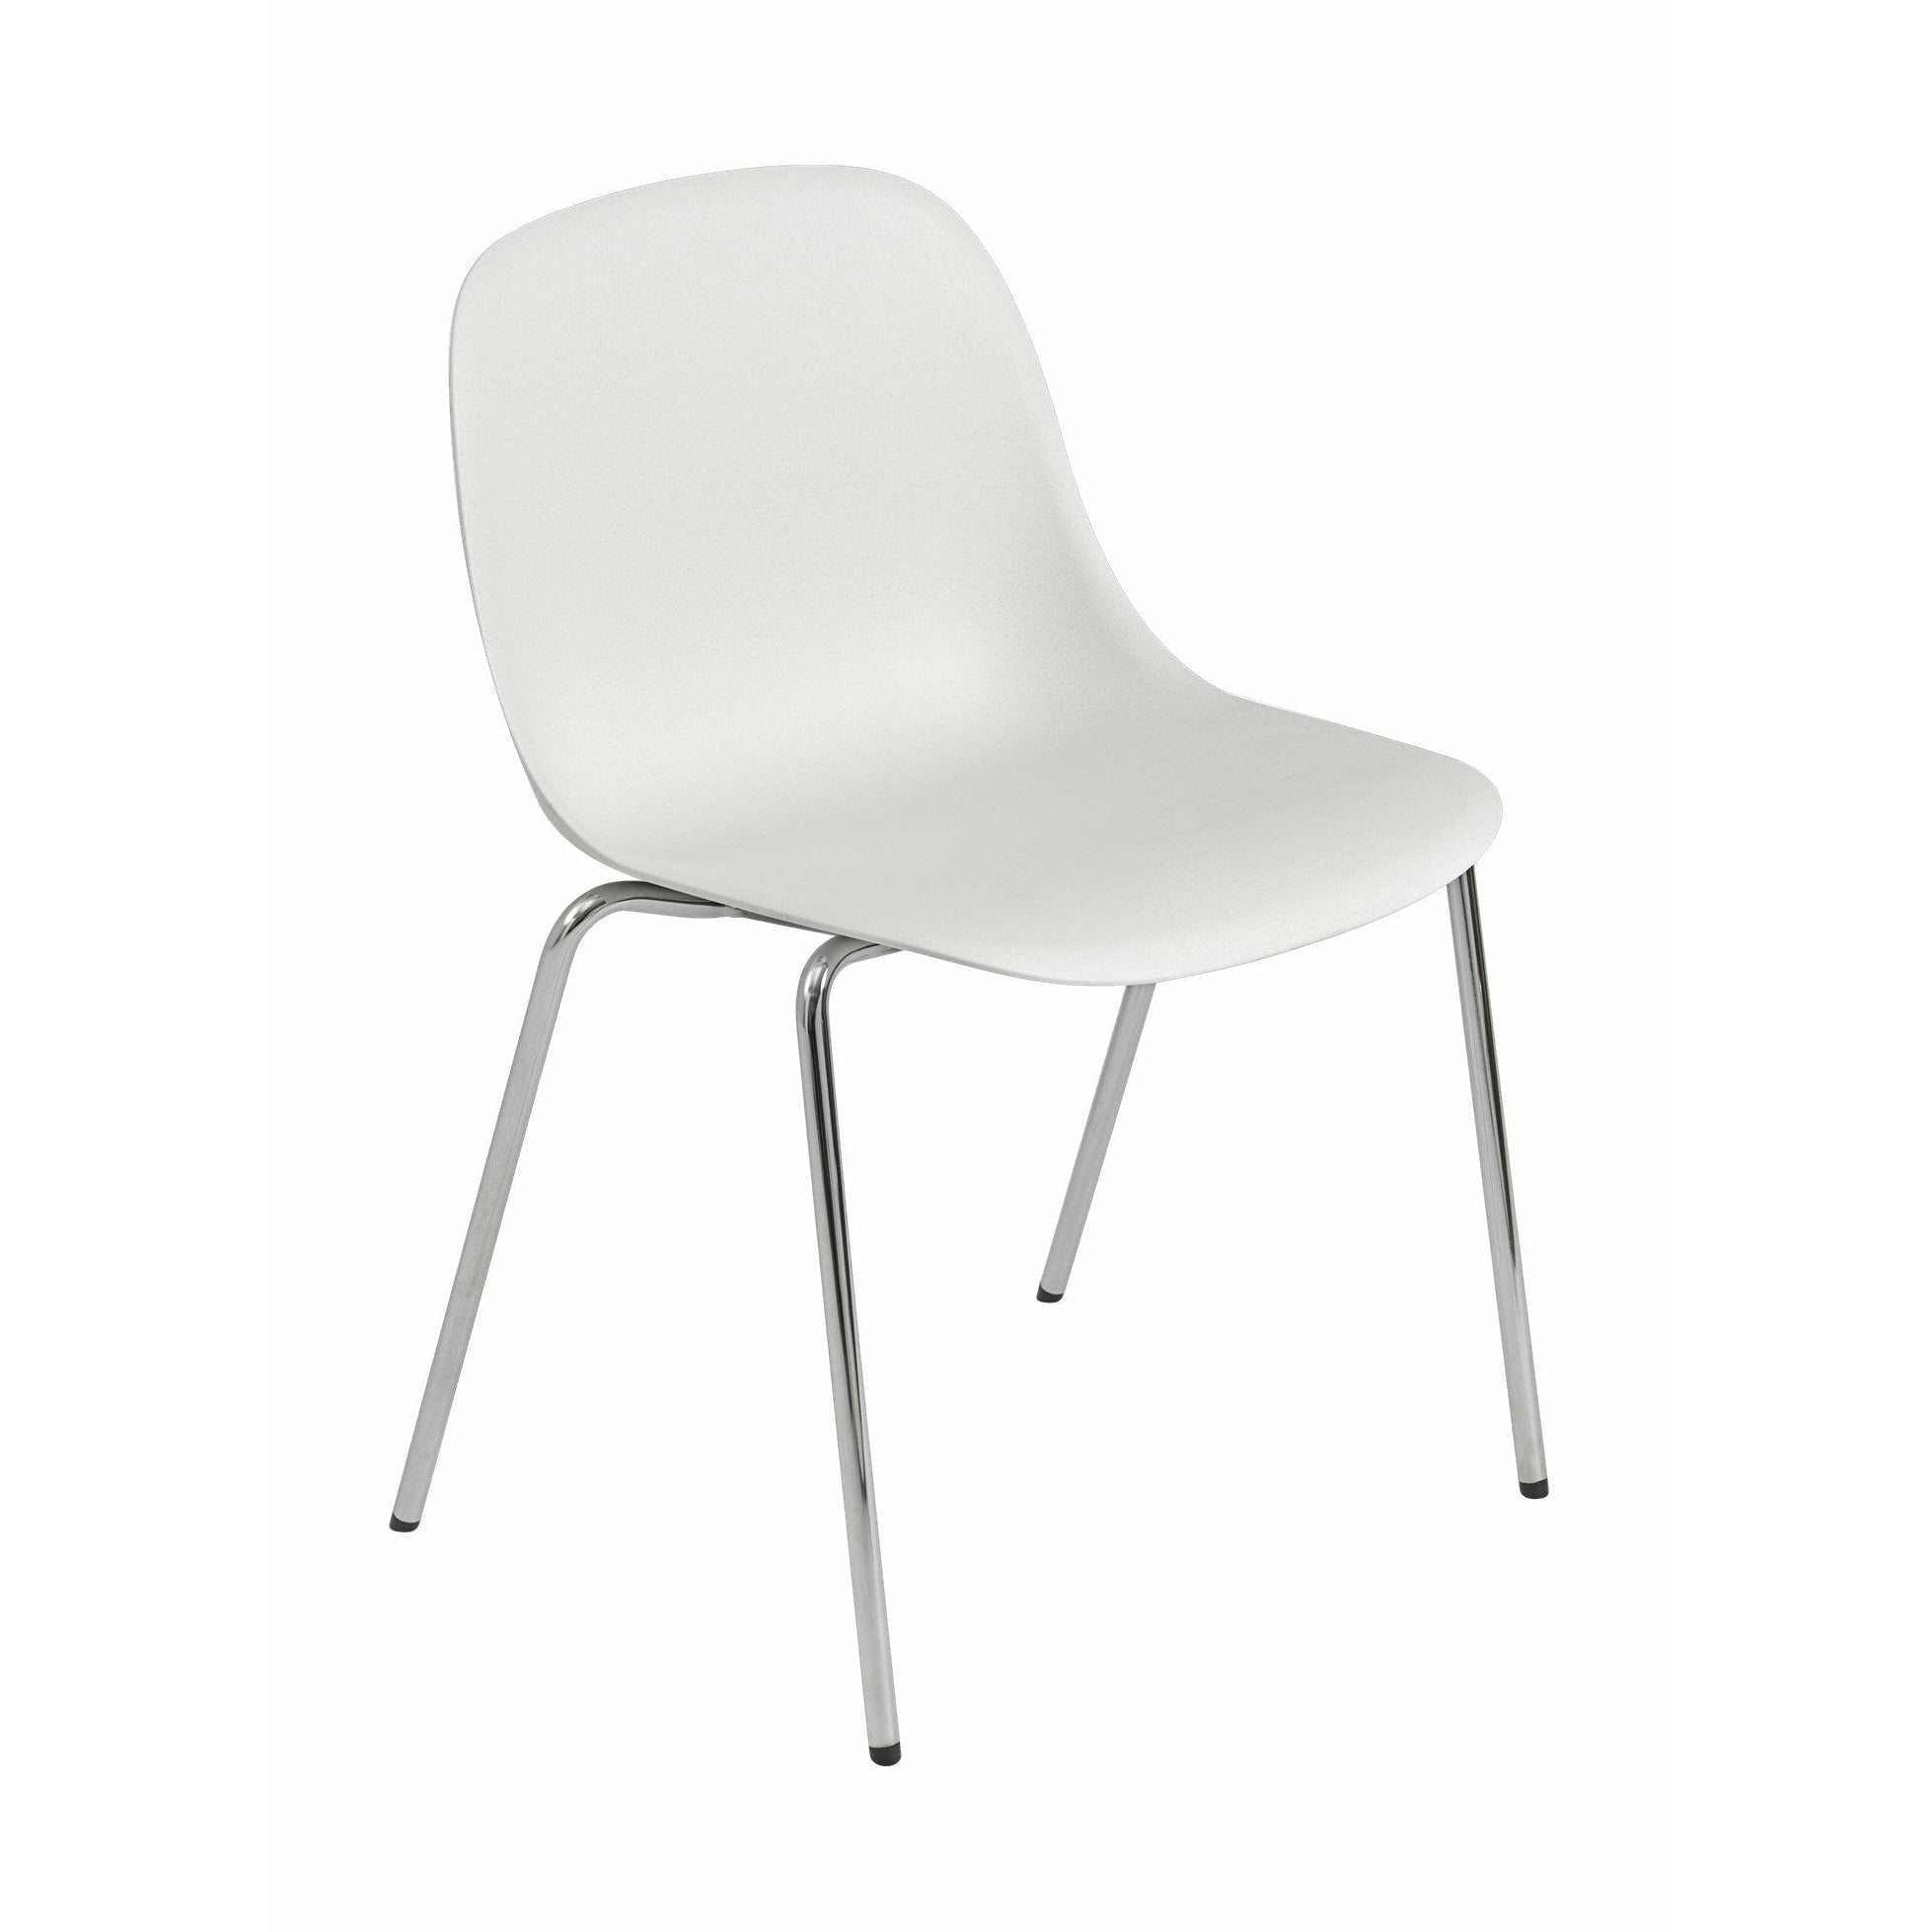 Muuto Fiber Side Chair Made Of Recycled Plastic A Base, Natural White/Chrome